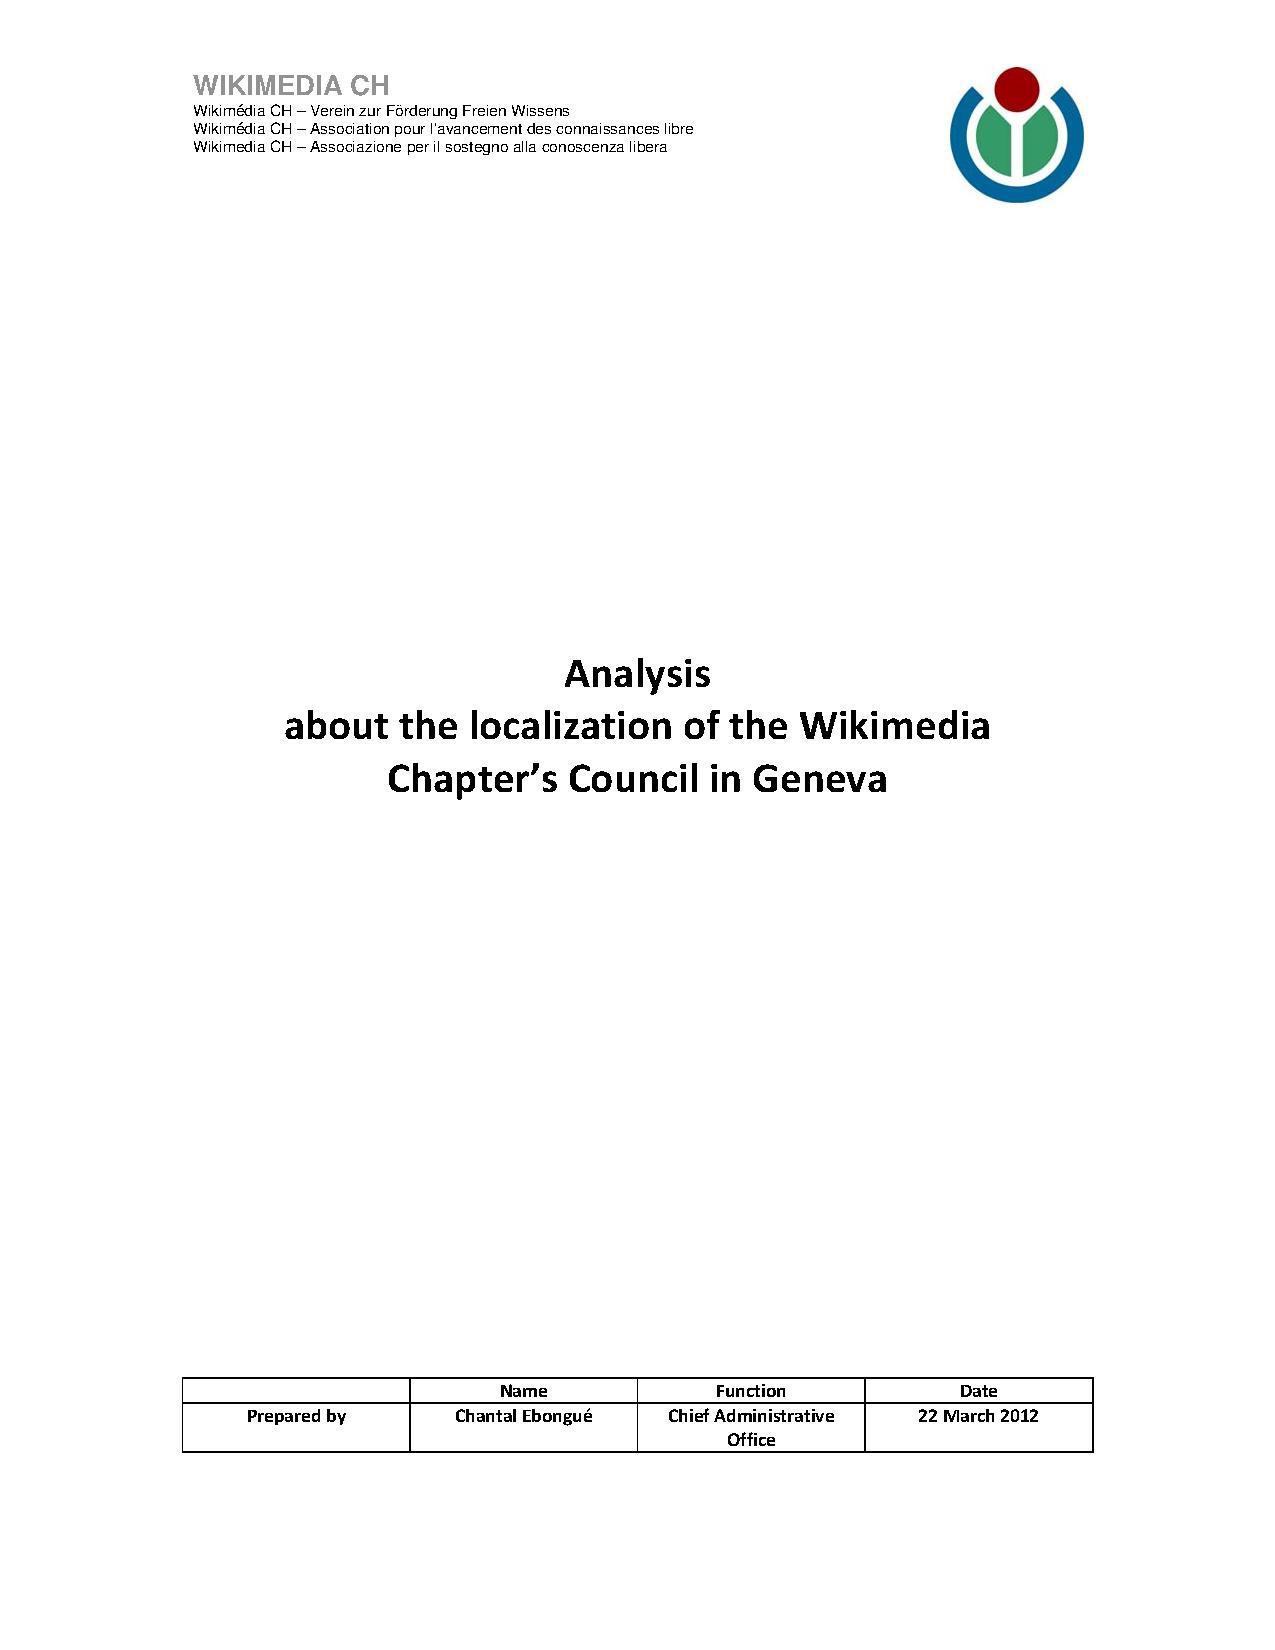 Analysis about the localization of the Wikimedia Chapter’s Council in Geneva.